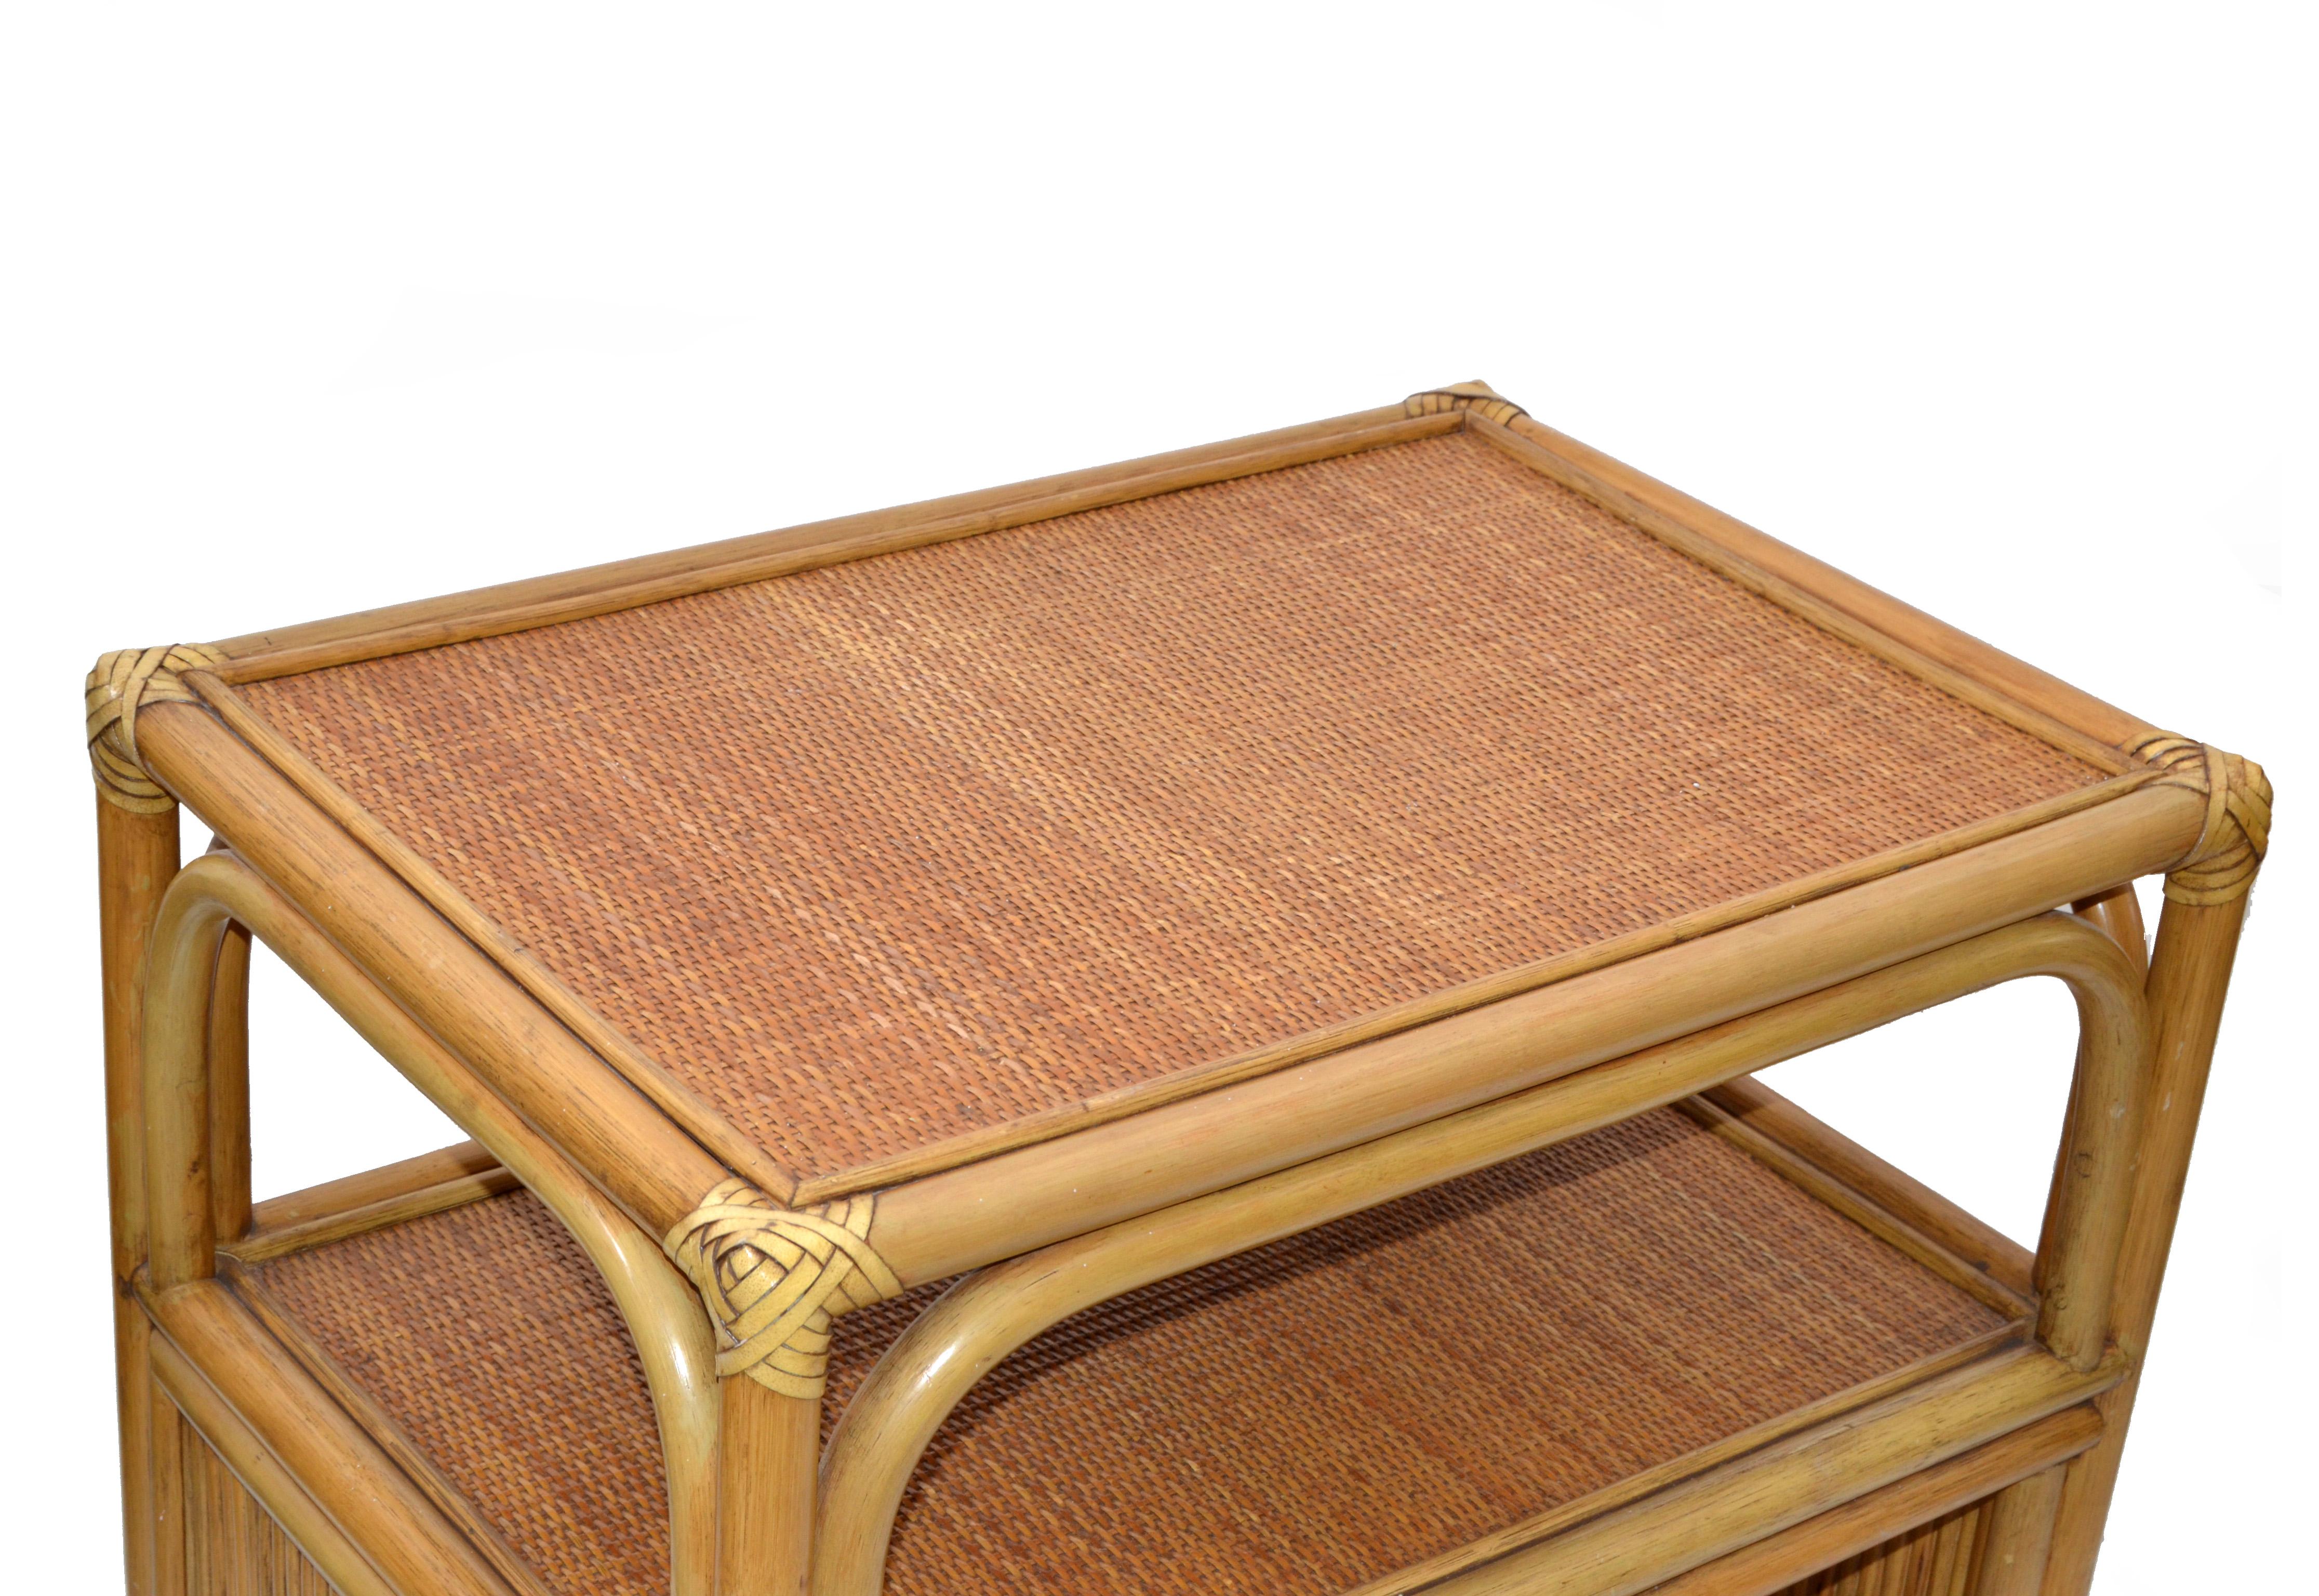 70s Mid-Century Modern Bamboo Handwoven Leather Corners Cane Top Cart Side Table For Sale 4